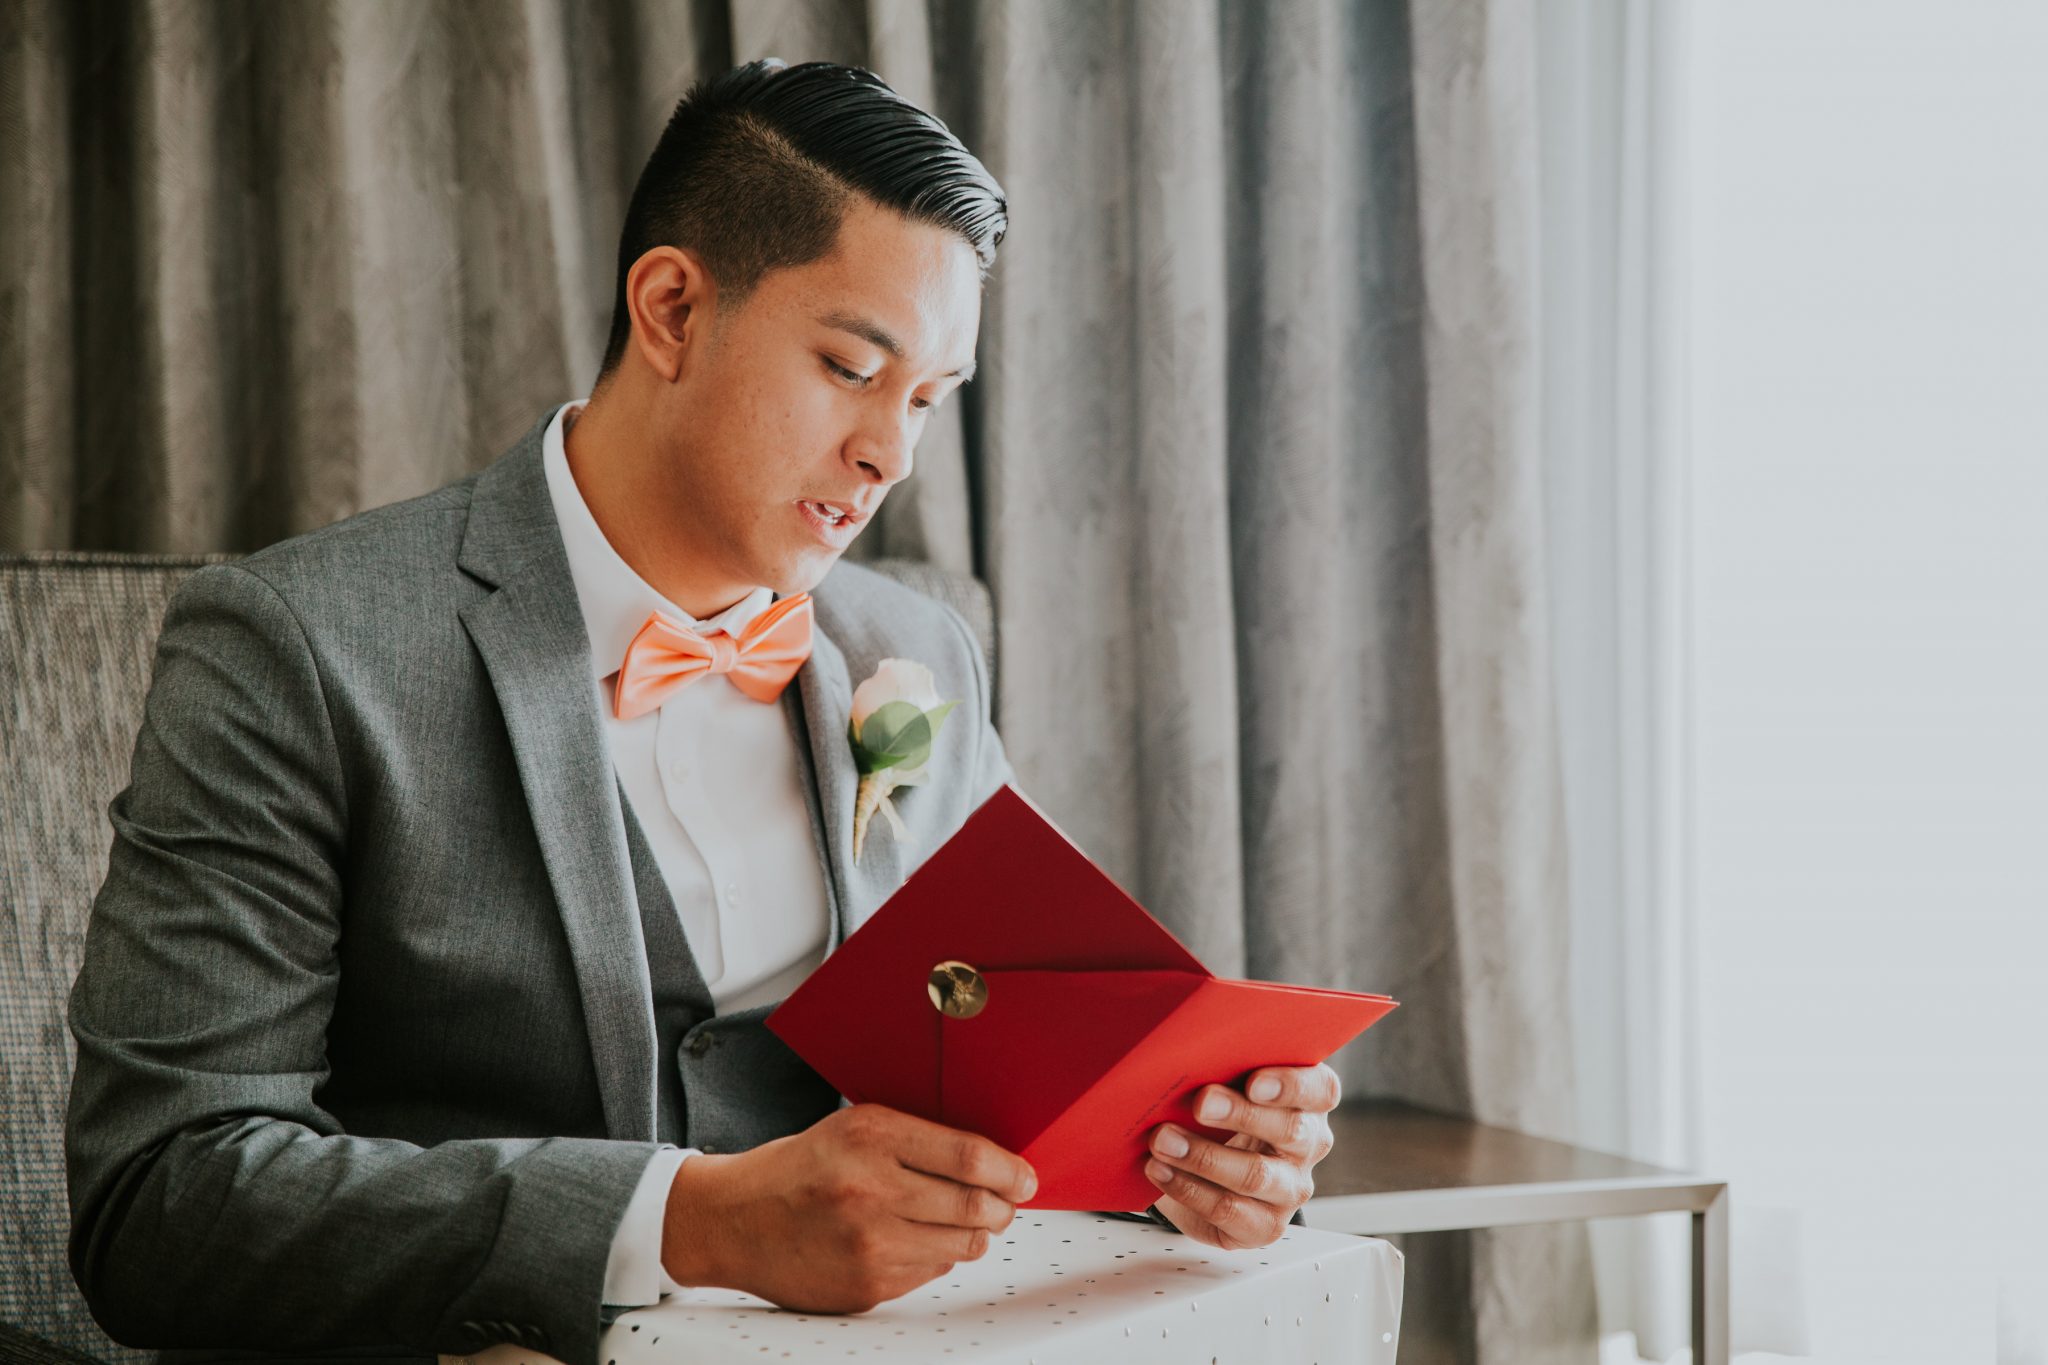 Heart-Warming Ways To Surprise Your Groom-To-Be On Your D-Day!